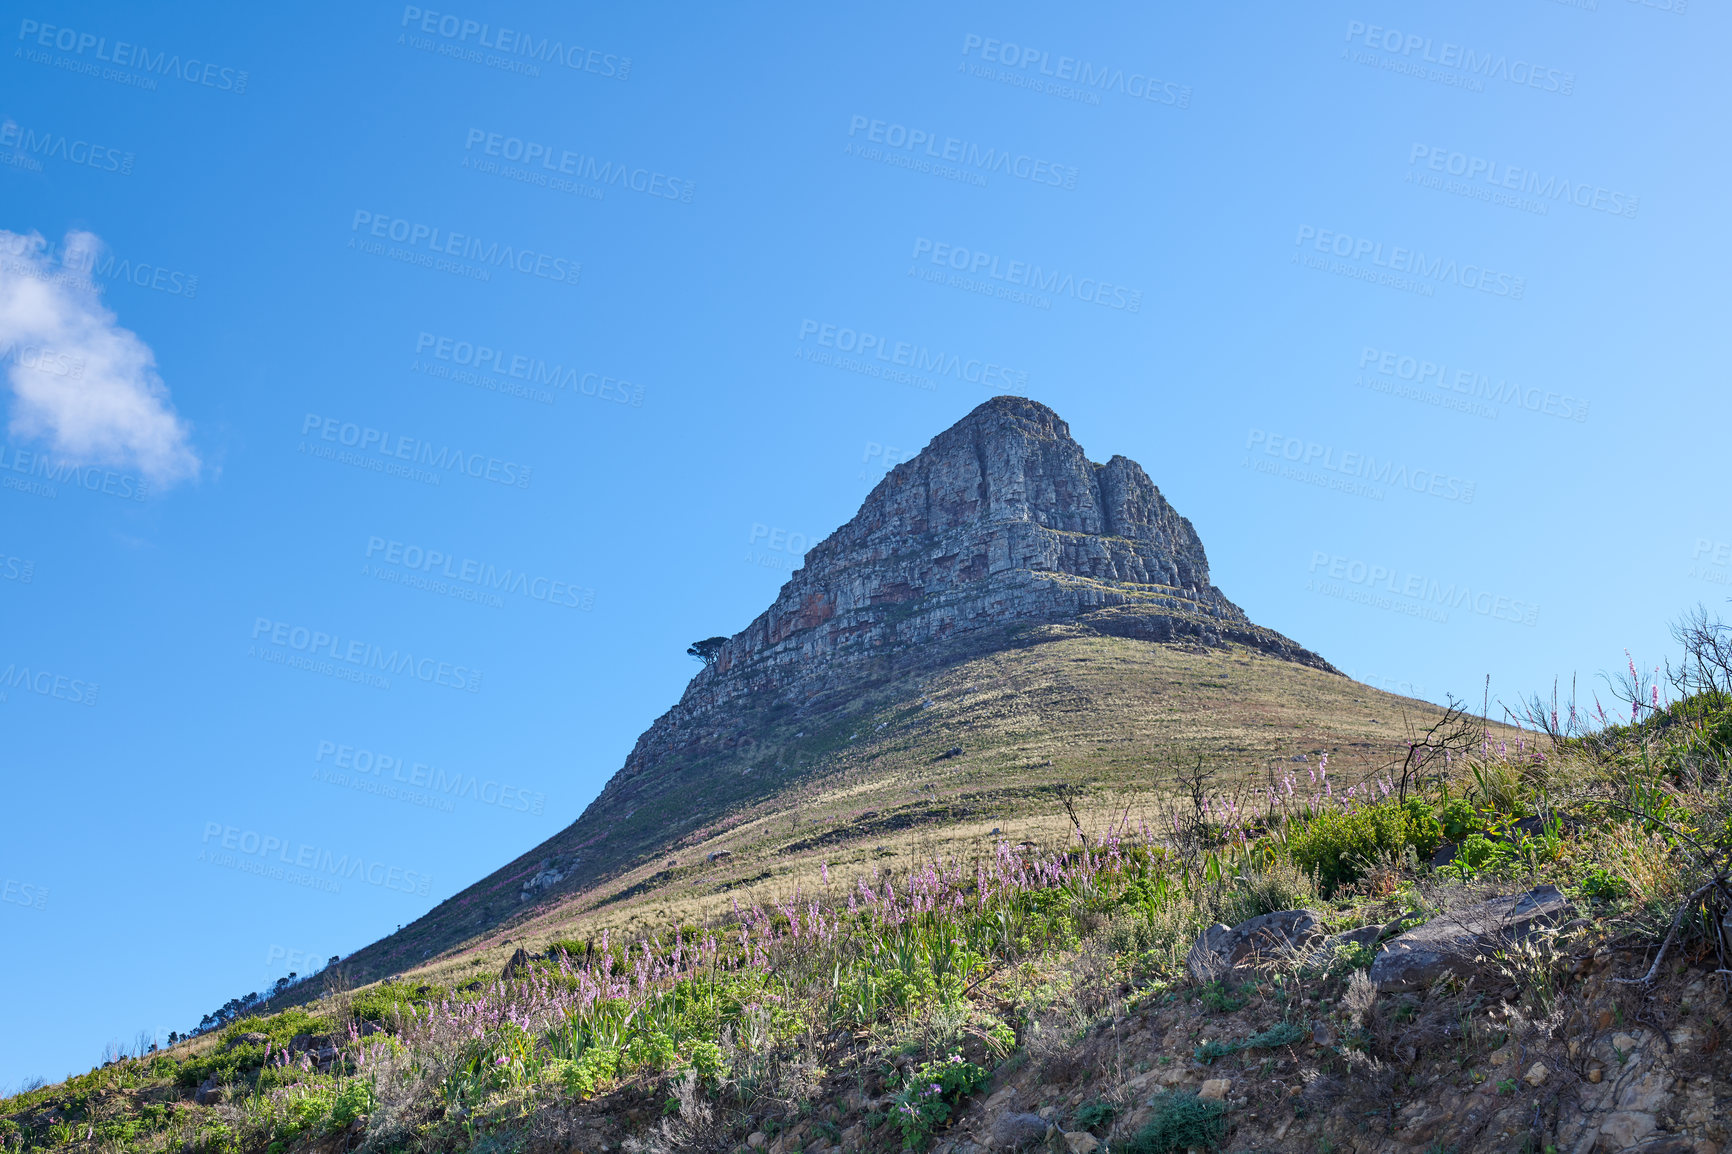 Buy stock photo Landscape of a mountain against a clear blue sky with copy space. Mountain peak with lush green pasture and flowers thriving in a natural environment. Popular tourism location in South Africa